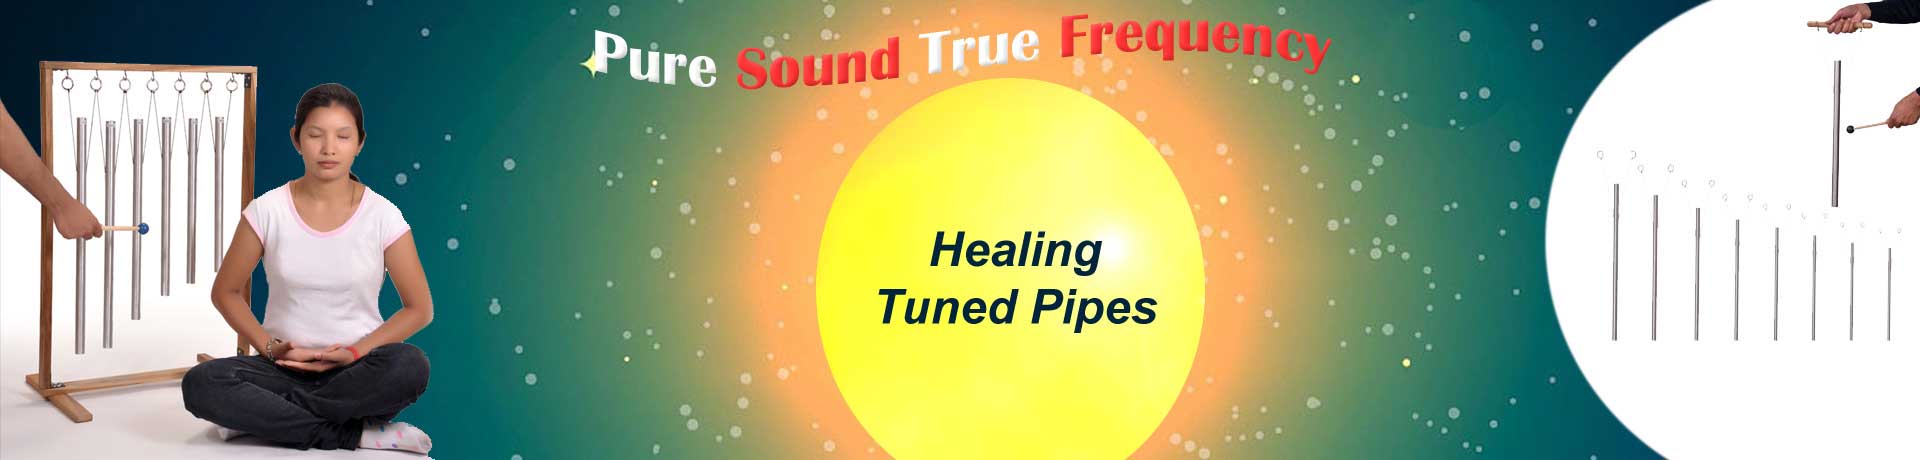 Healing Tuned Pipes